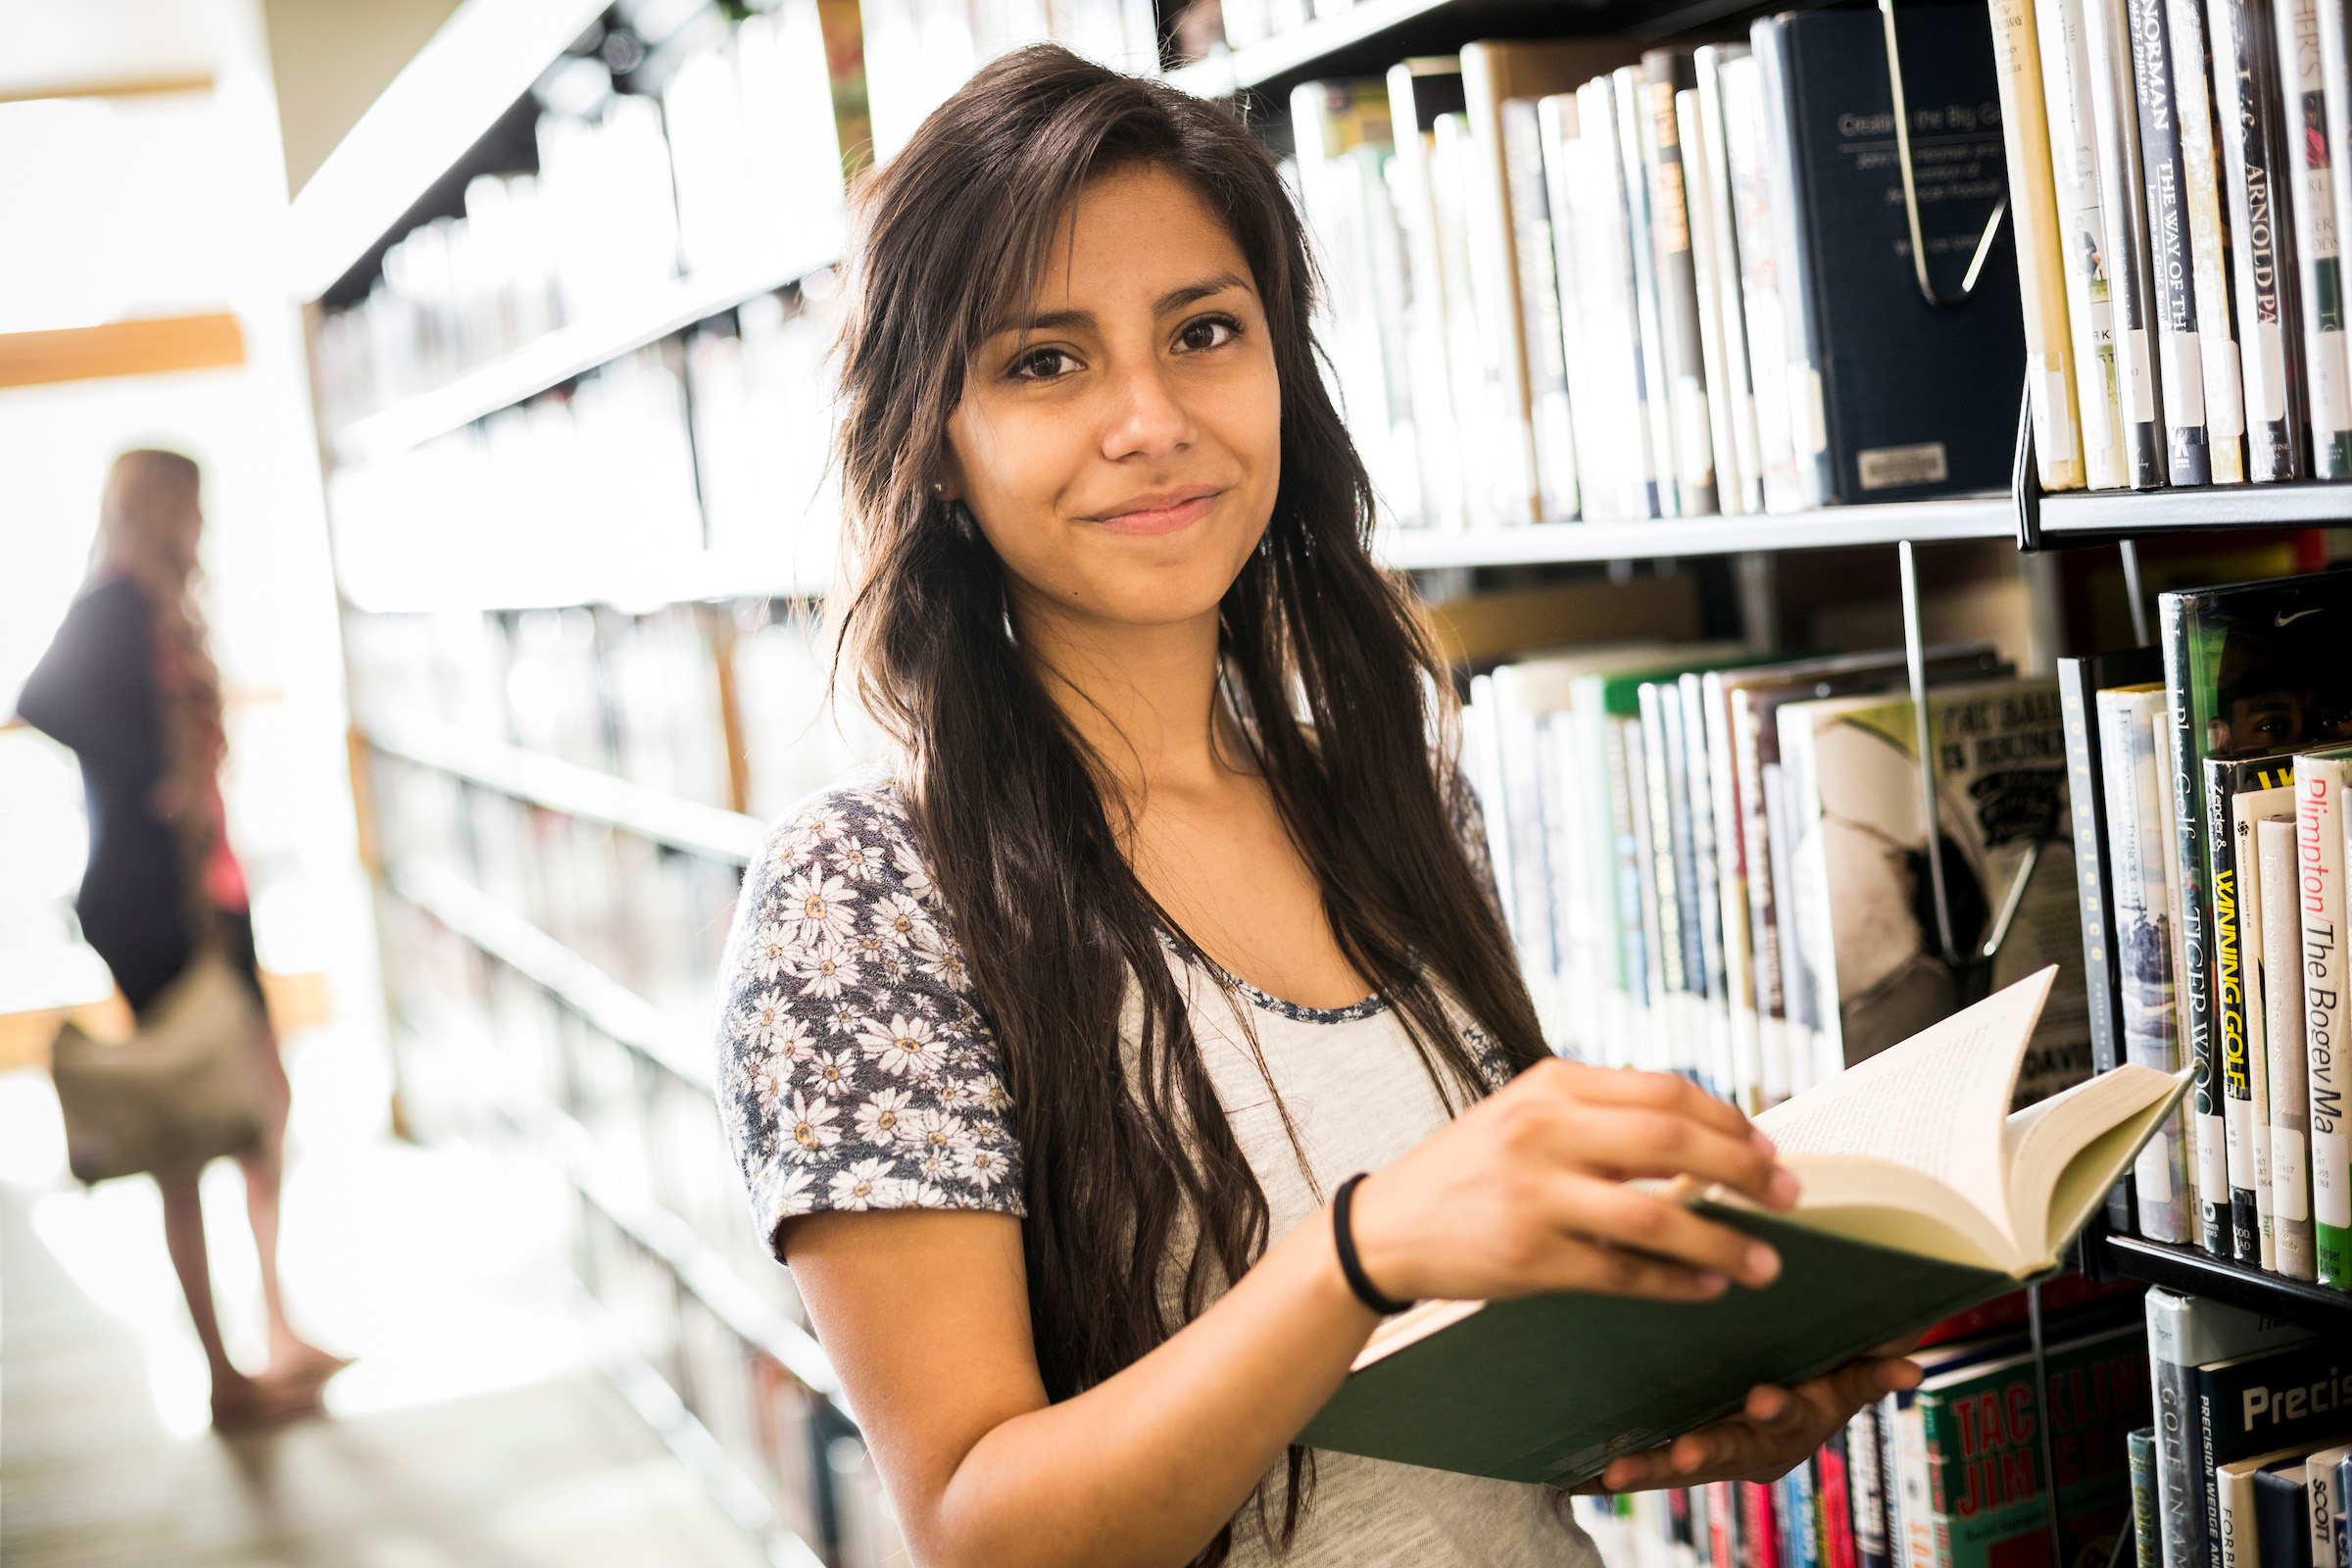 Student in the Library holding a book